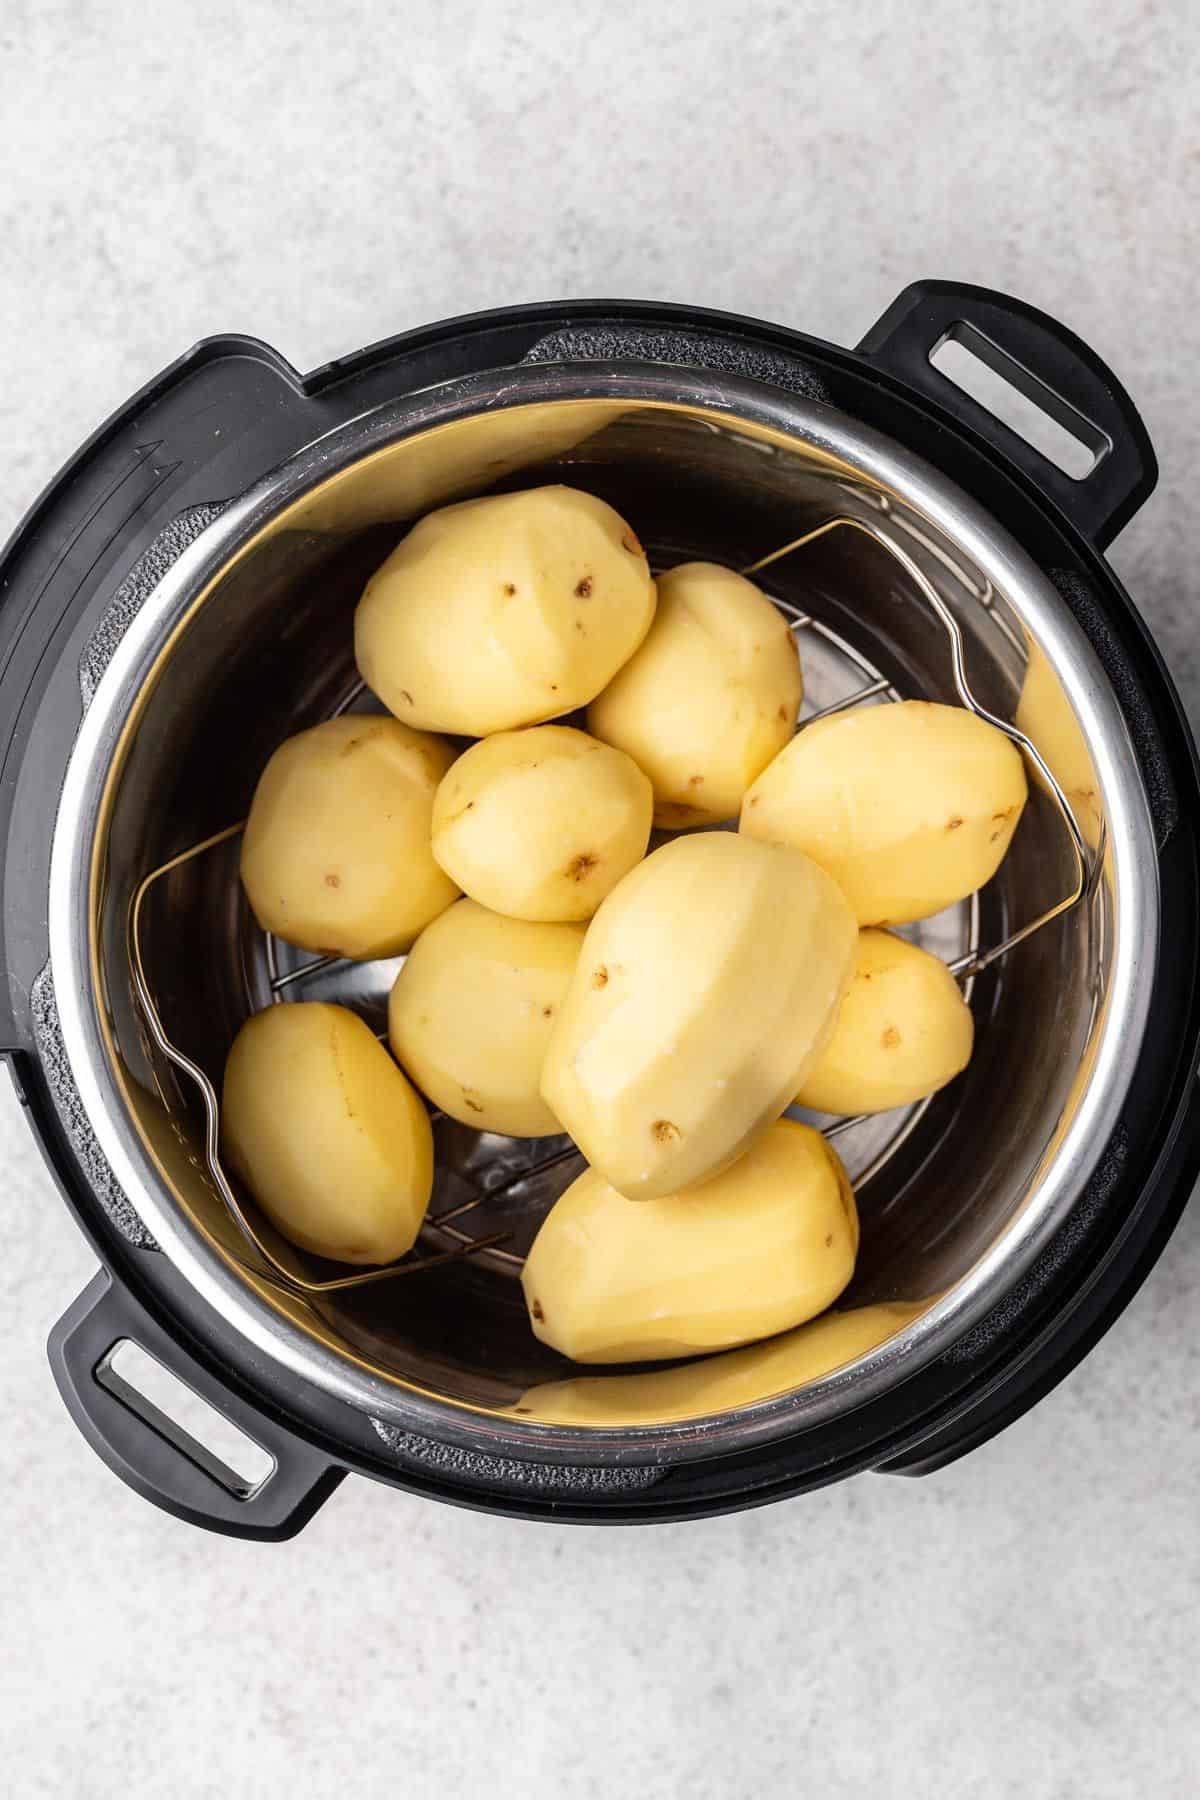 Peeled potatoes on a trivet with water in the Instant Pot.